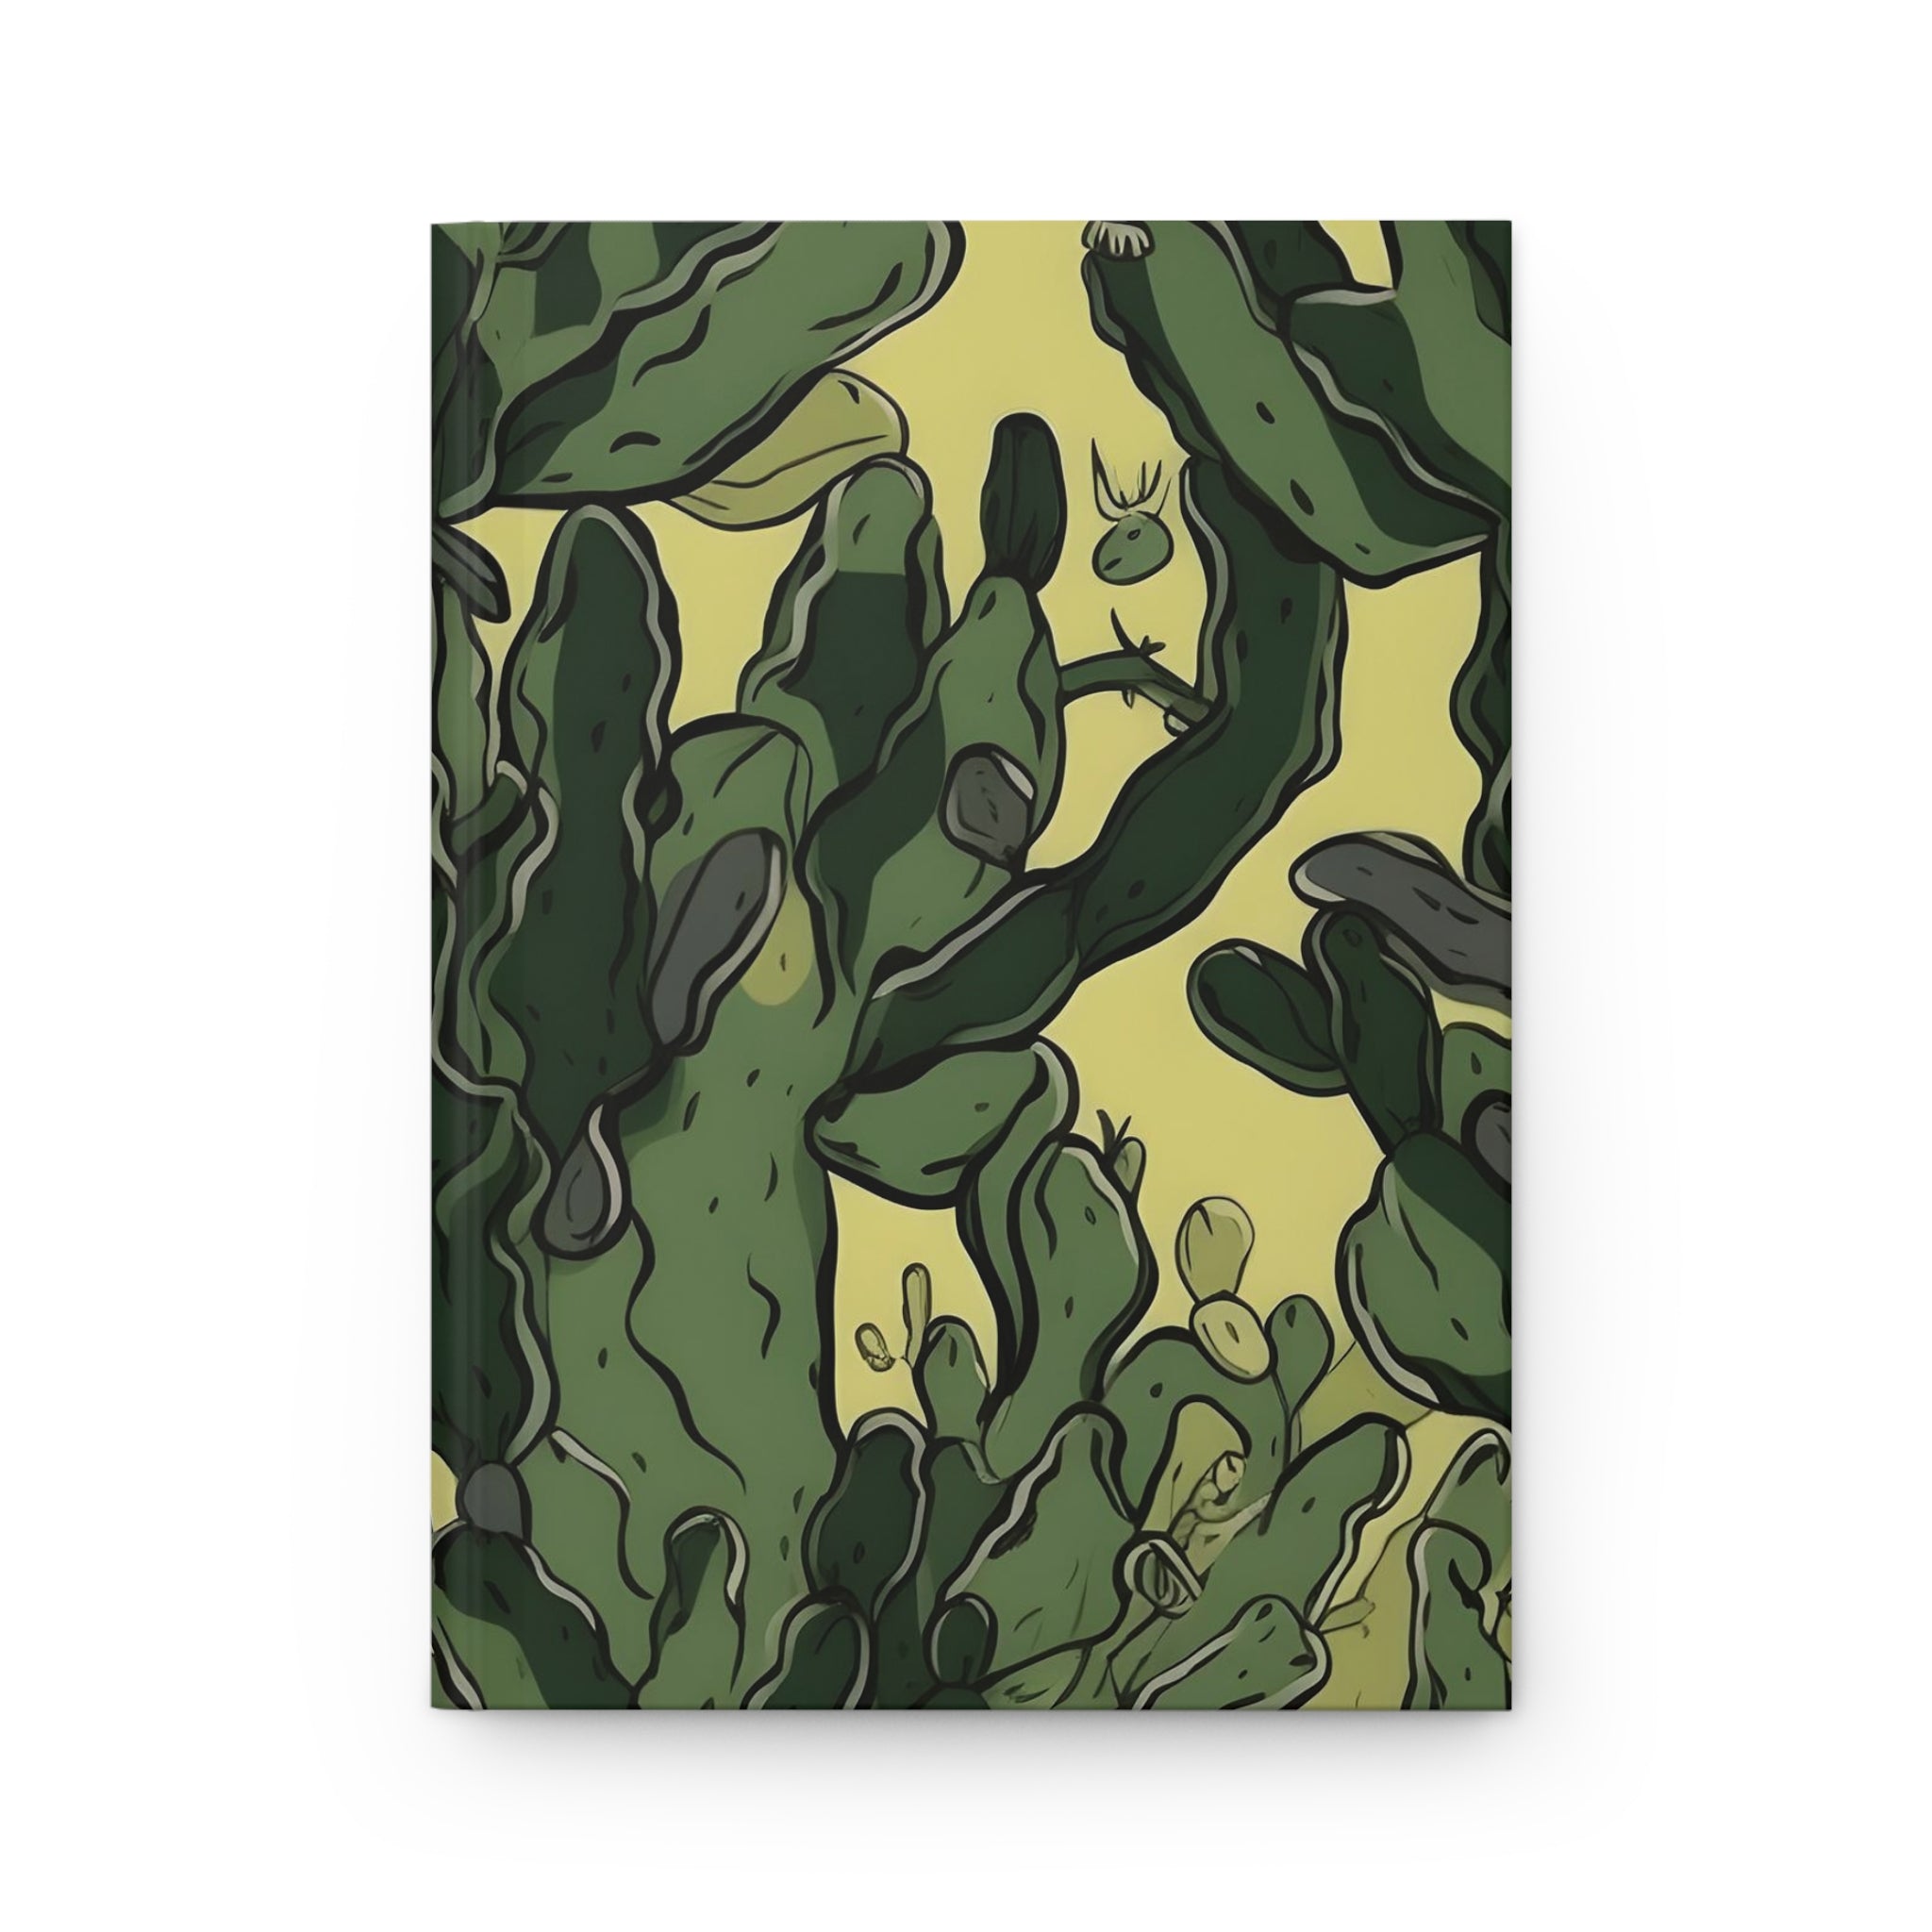 Desert Camouflage Hardcover Journal - Lined/Blank Pages - Military Style Notebook - Tactical Diary - Gift for Veterans, Outdoor Enthusiasts